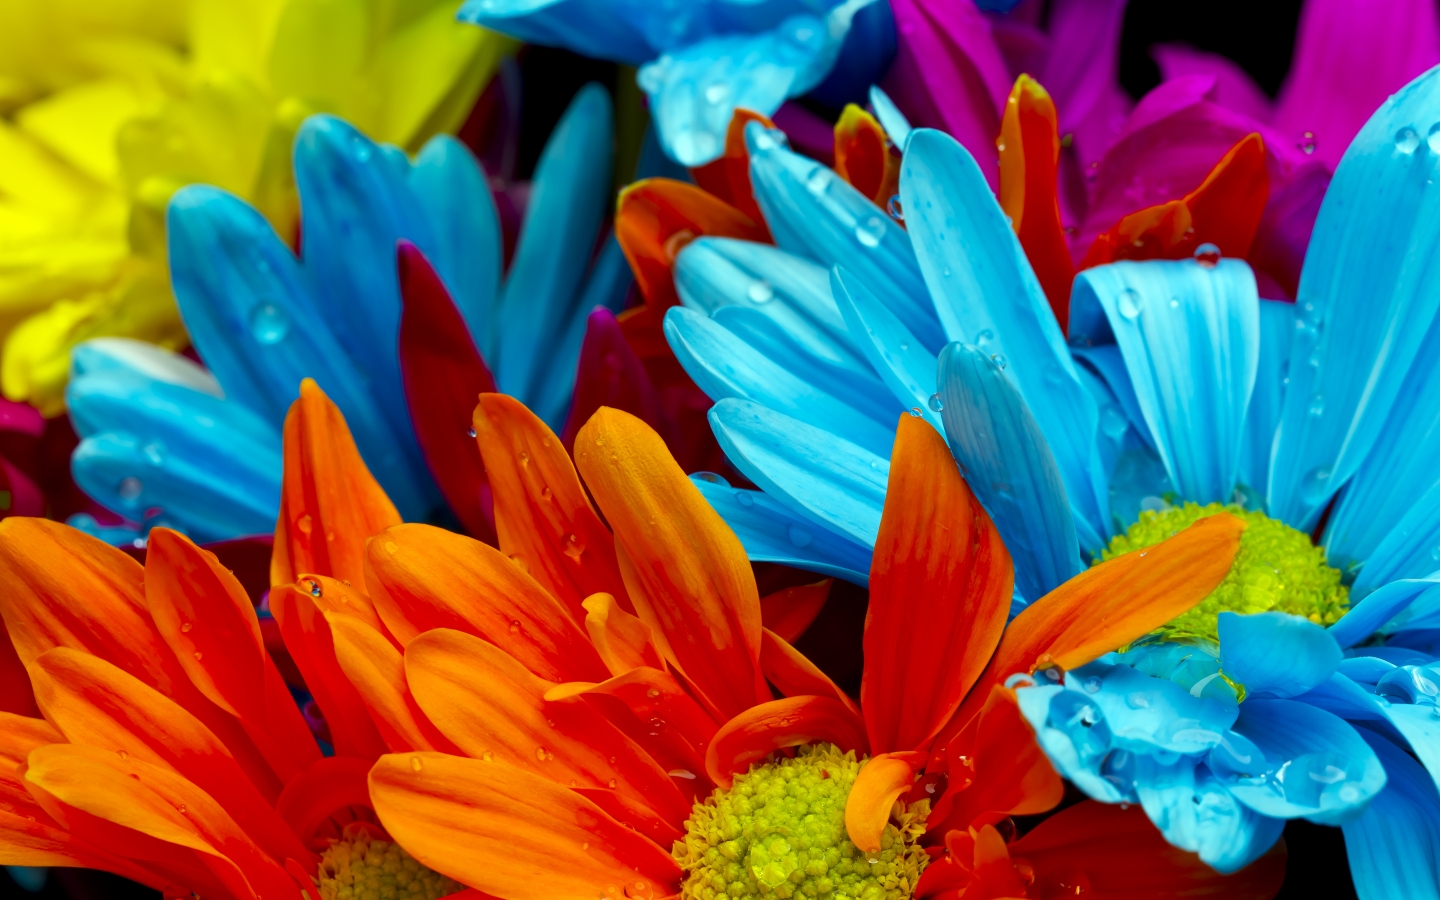 Amazing Flower Colors for 1440 x 900 widescreen resolution